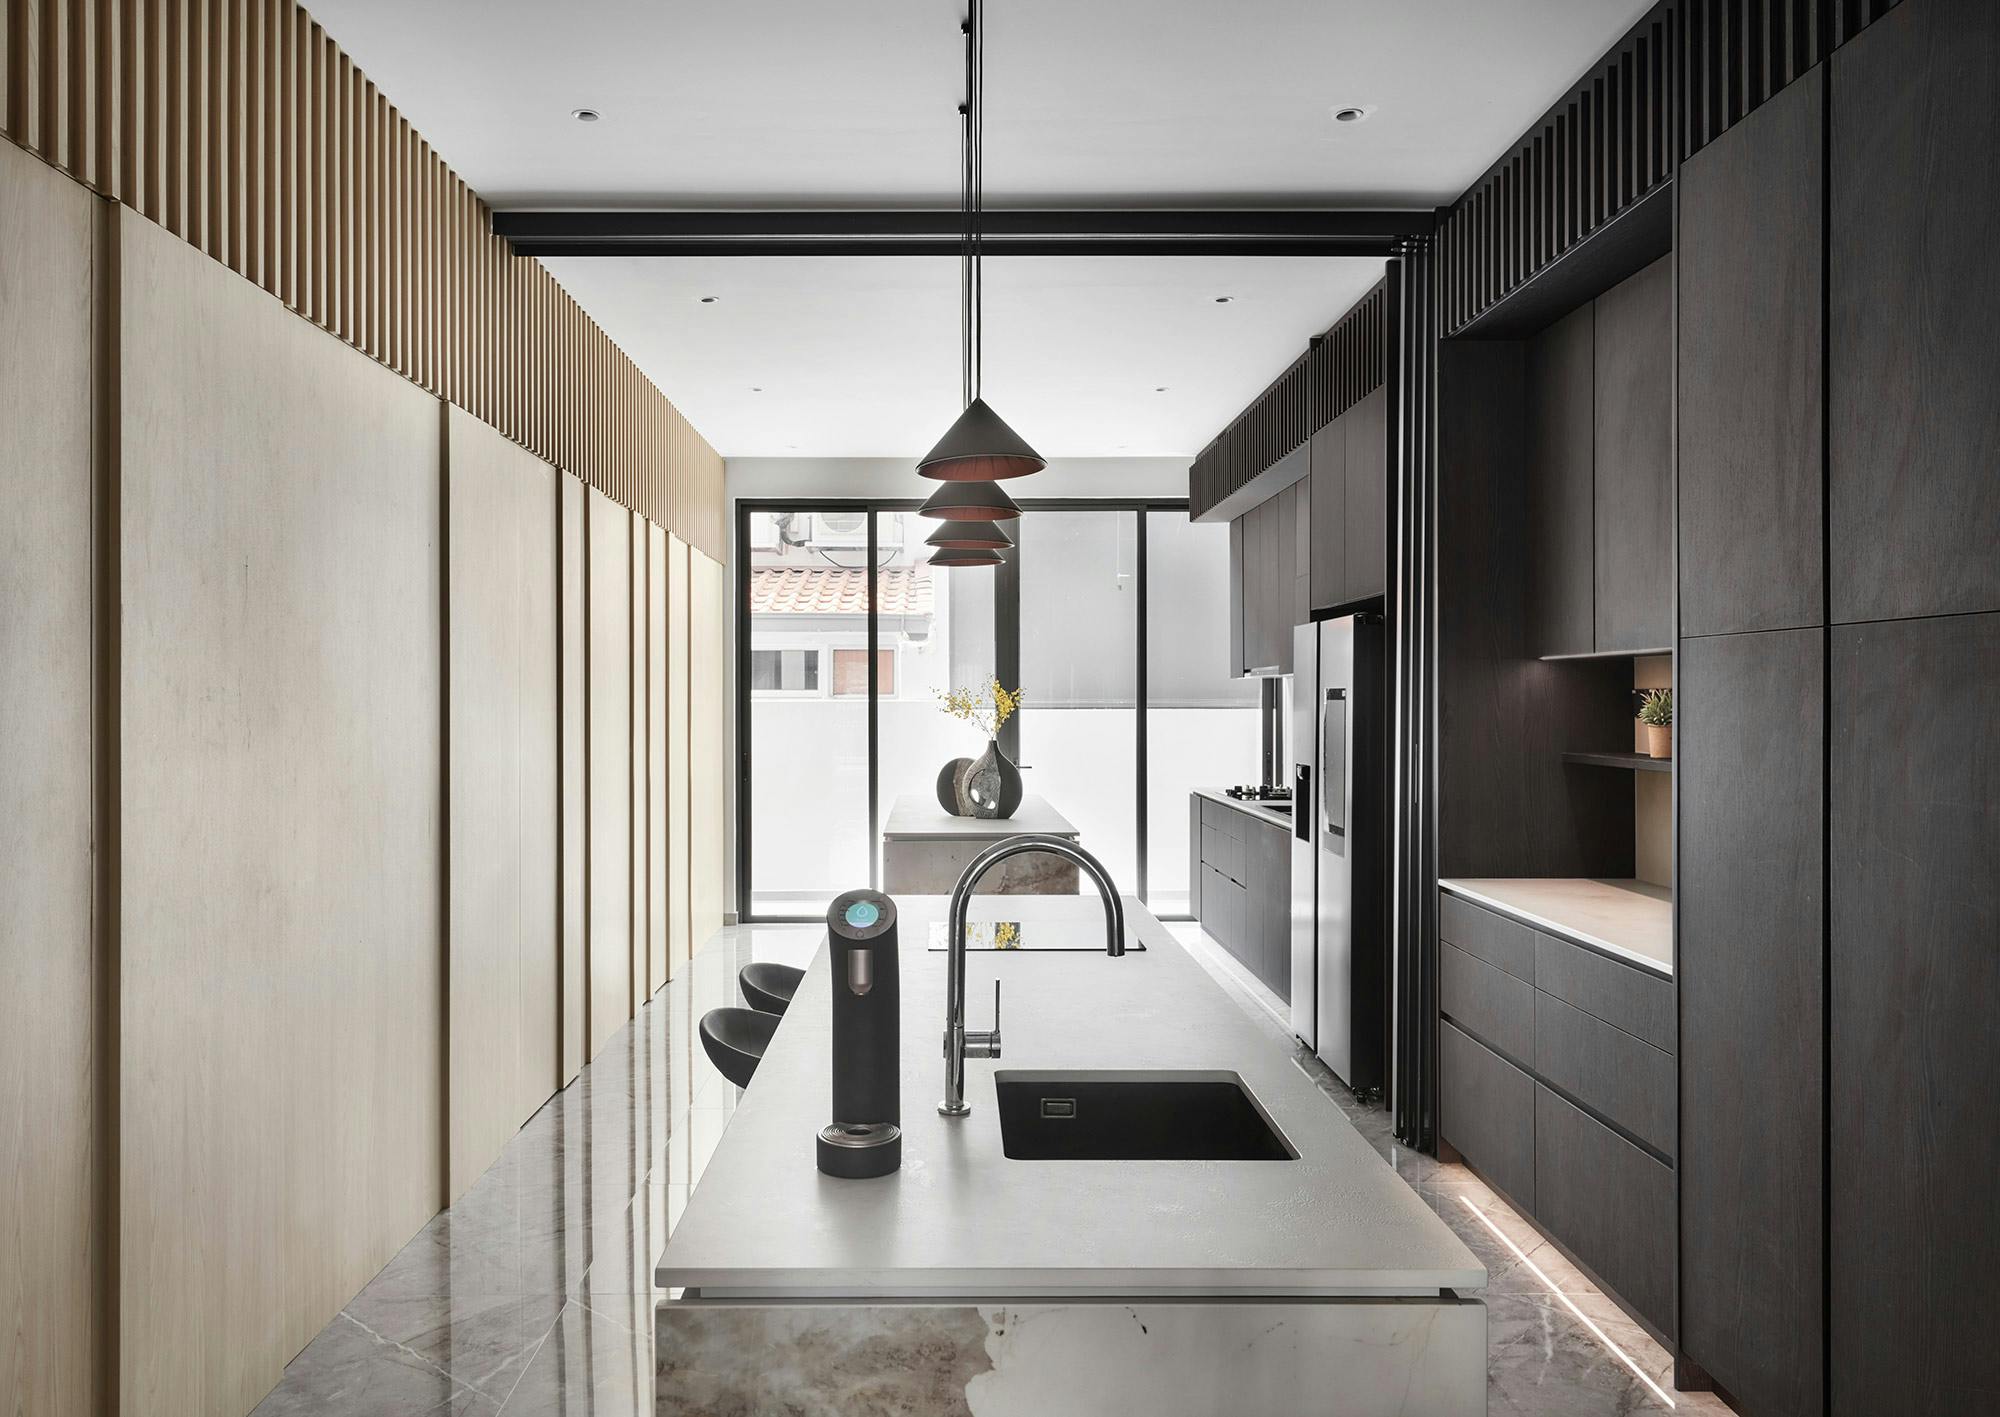 Numéro d'image 46 de la section actuelle de DKTN Sirius adds a welcoming touch to the kitchens of a residential development in Dubai de Cosentino France